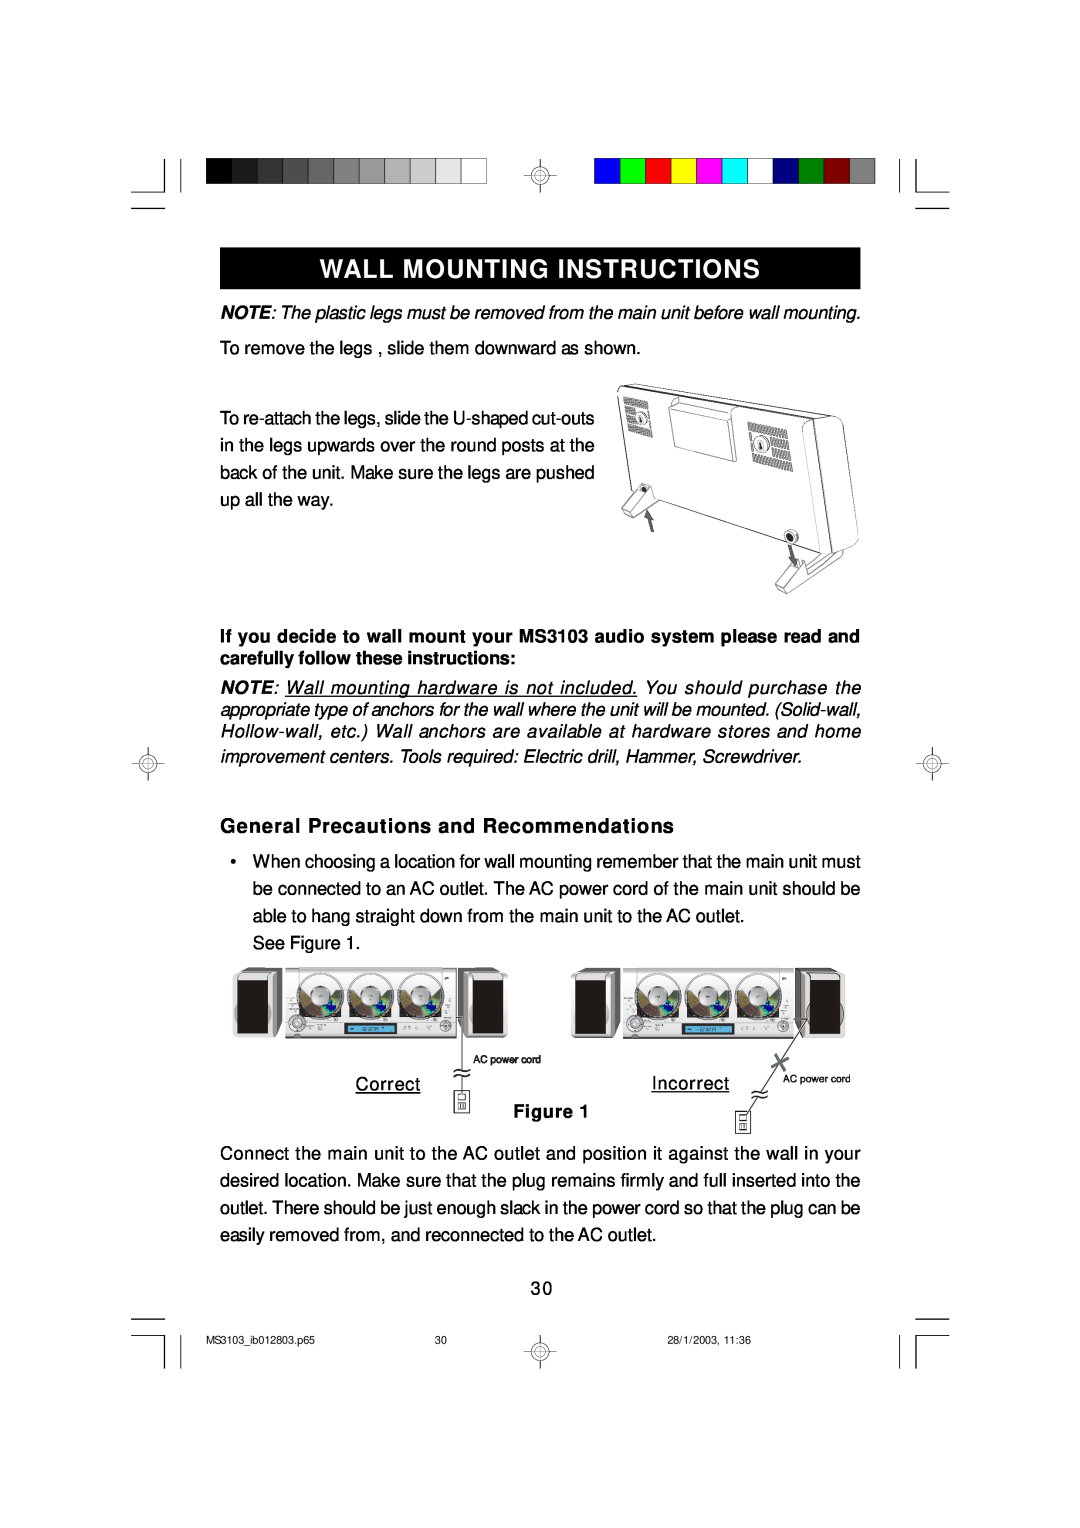 Emerson MS3103 owner manual Wall Mounting Instructions, General Precautions and Recommendations 